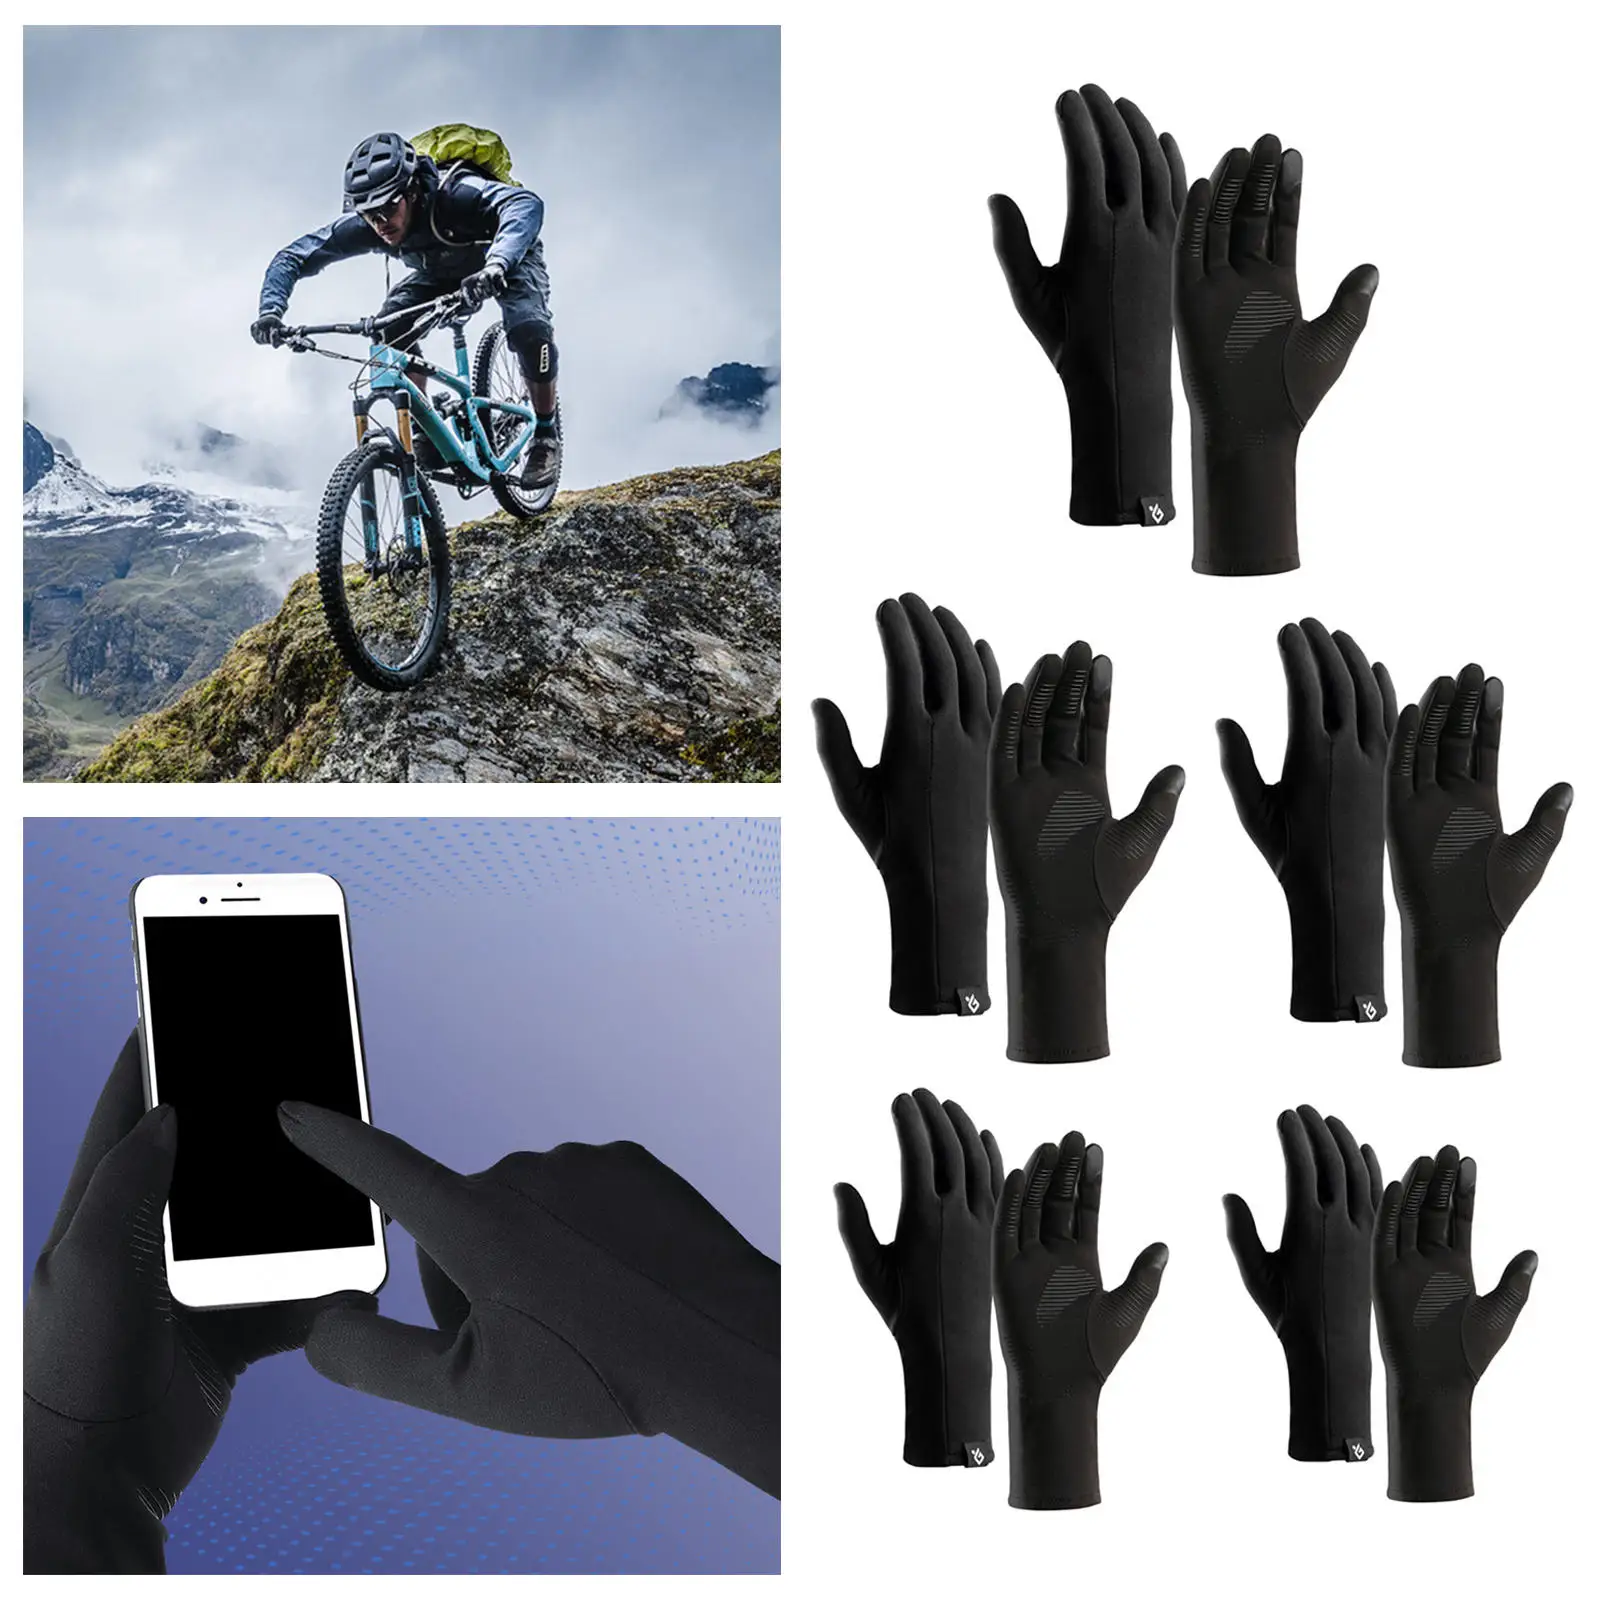 Windproof Men Gloves AntiSlip Touchscreen Warm Light Thermal Full Finger Driving Ski Winter Running Motorcycle Cycling Driving